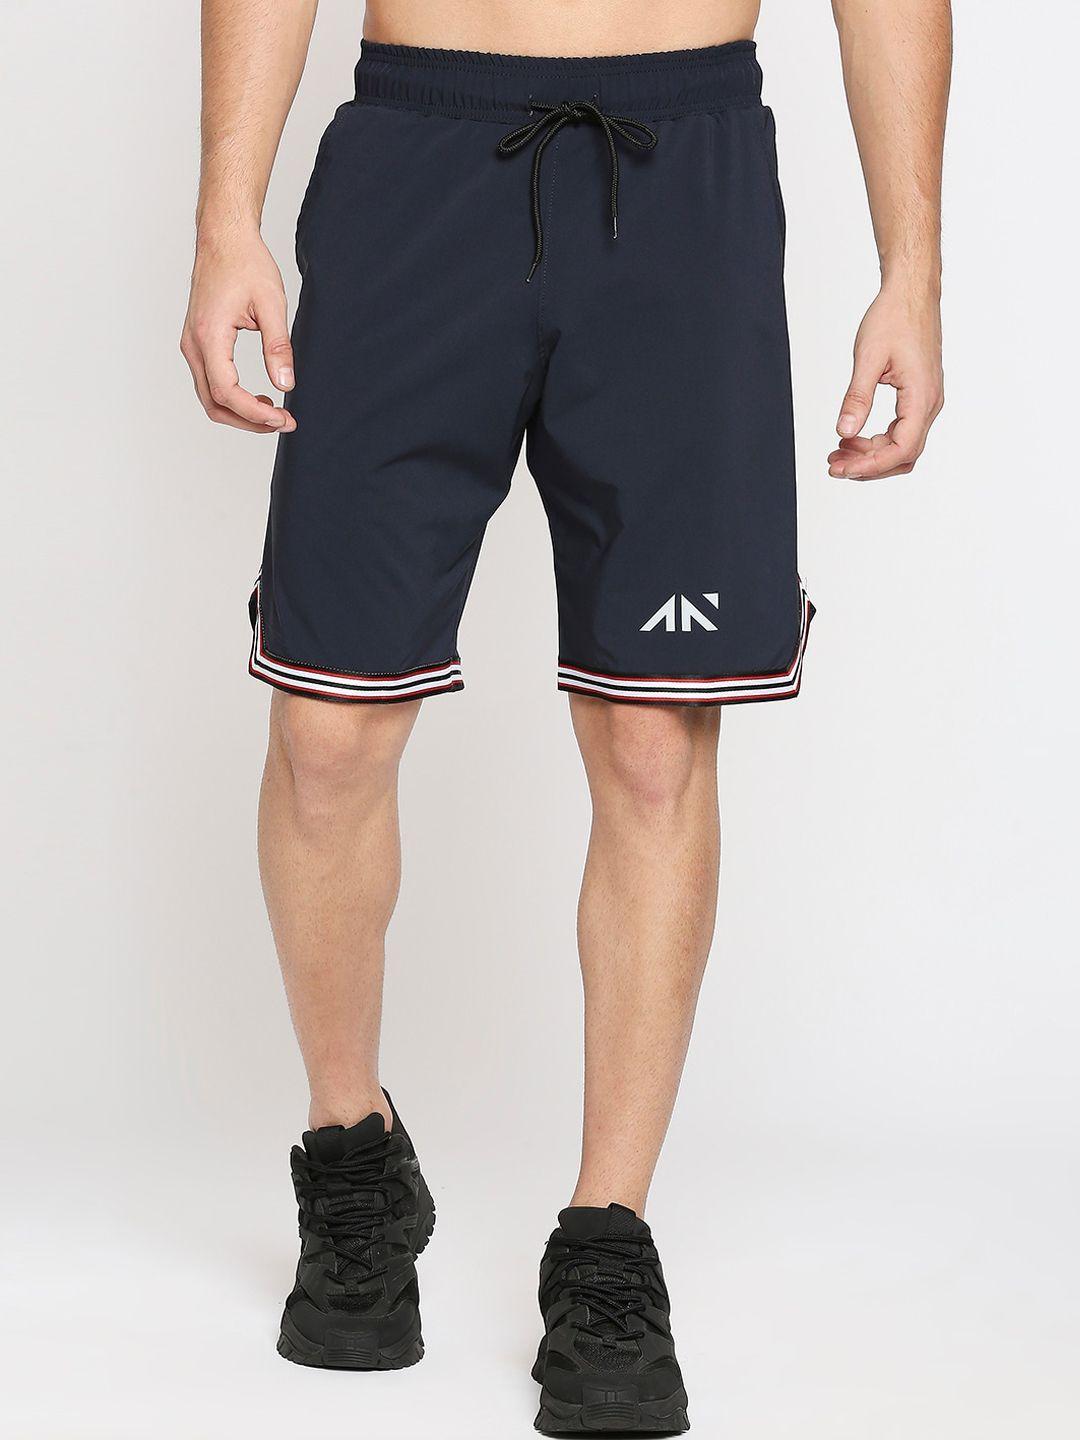 aesthetic-nation-men-navy-blue-loose-fit-training-or-gym-sports-shorts